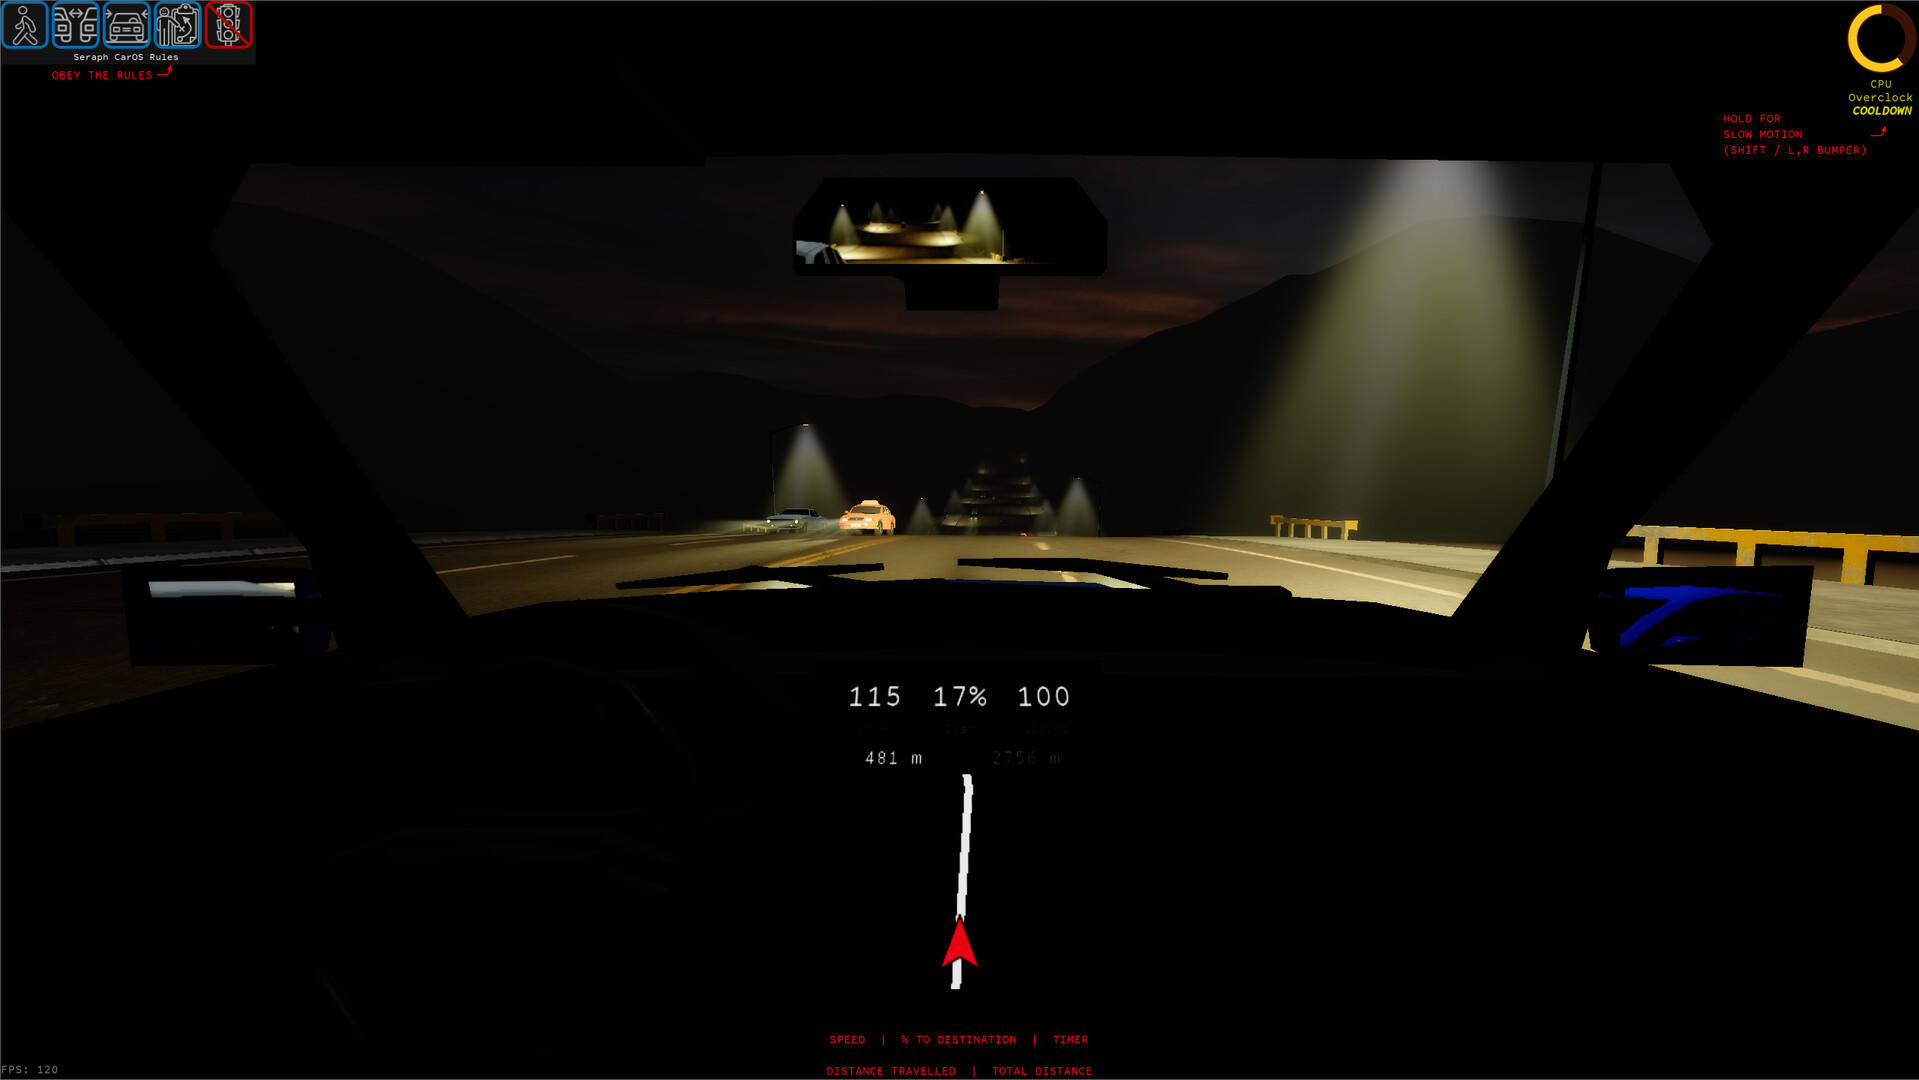 Driving Home(icide) screenshot game